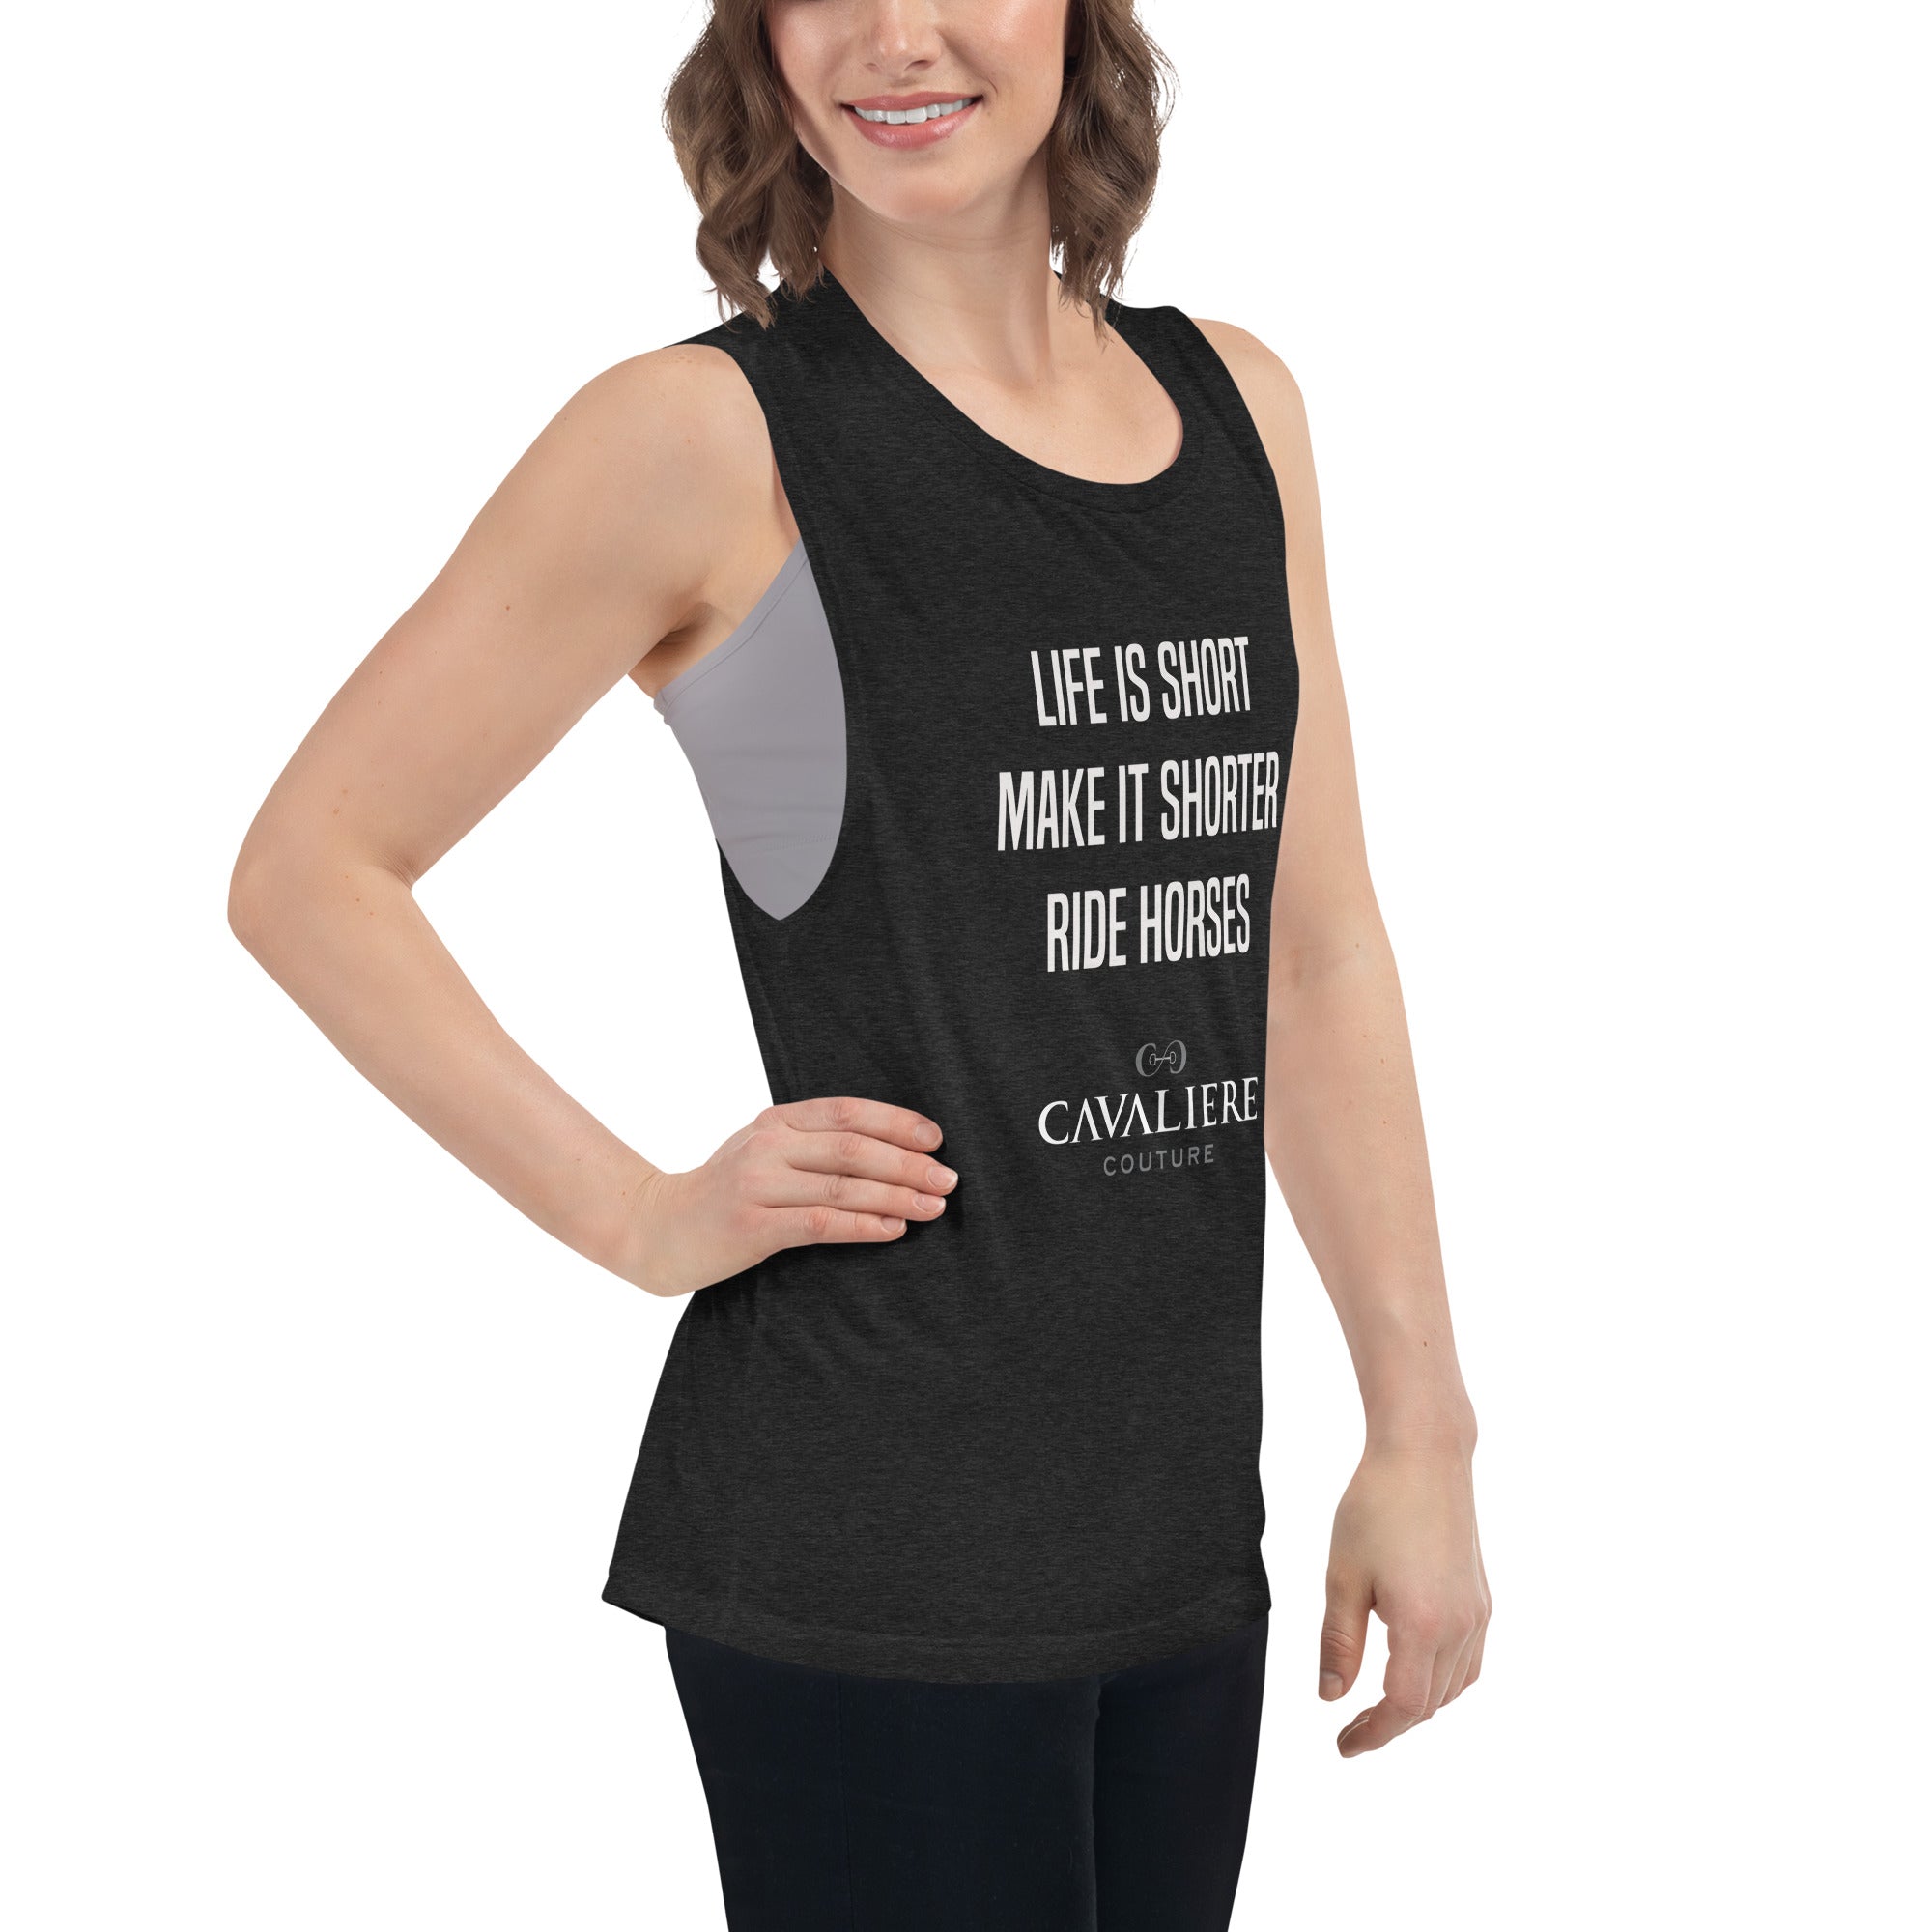 Funny Workout Shirts For Women -Gym Workout Shirts For Women